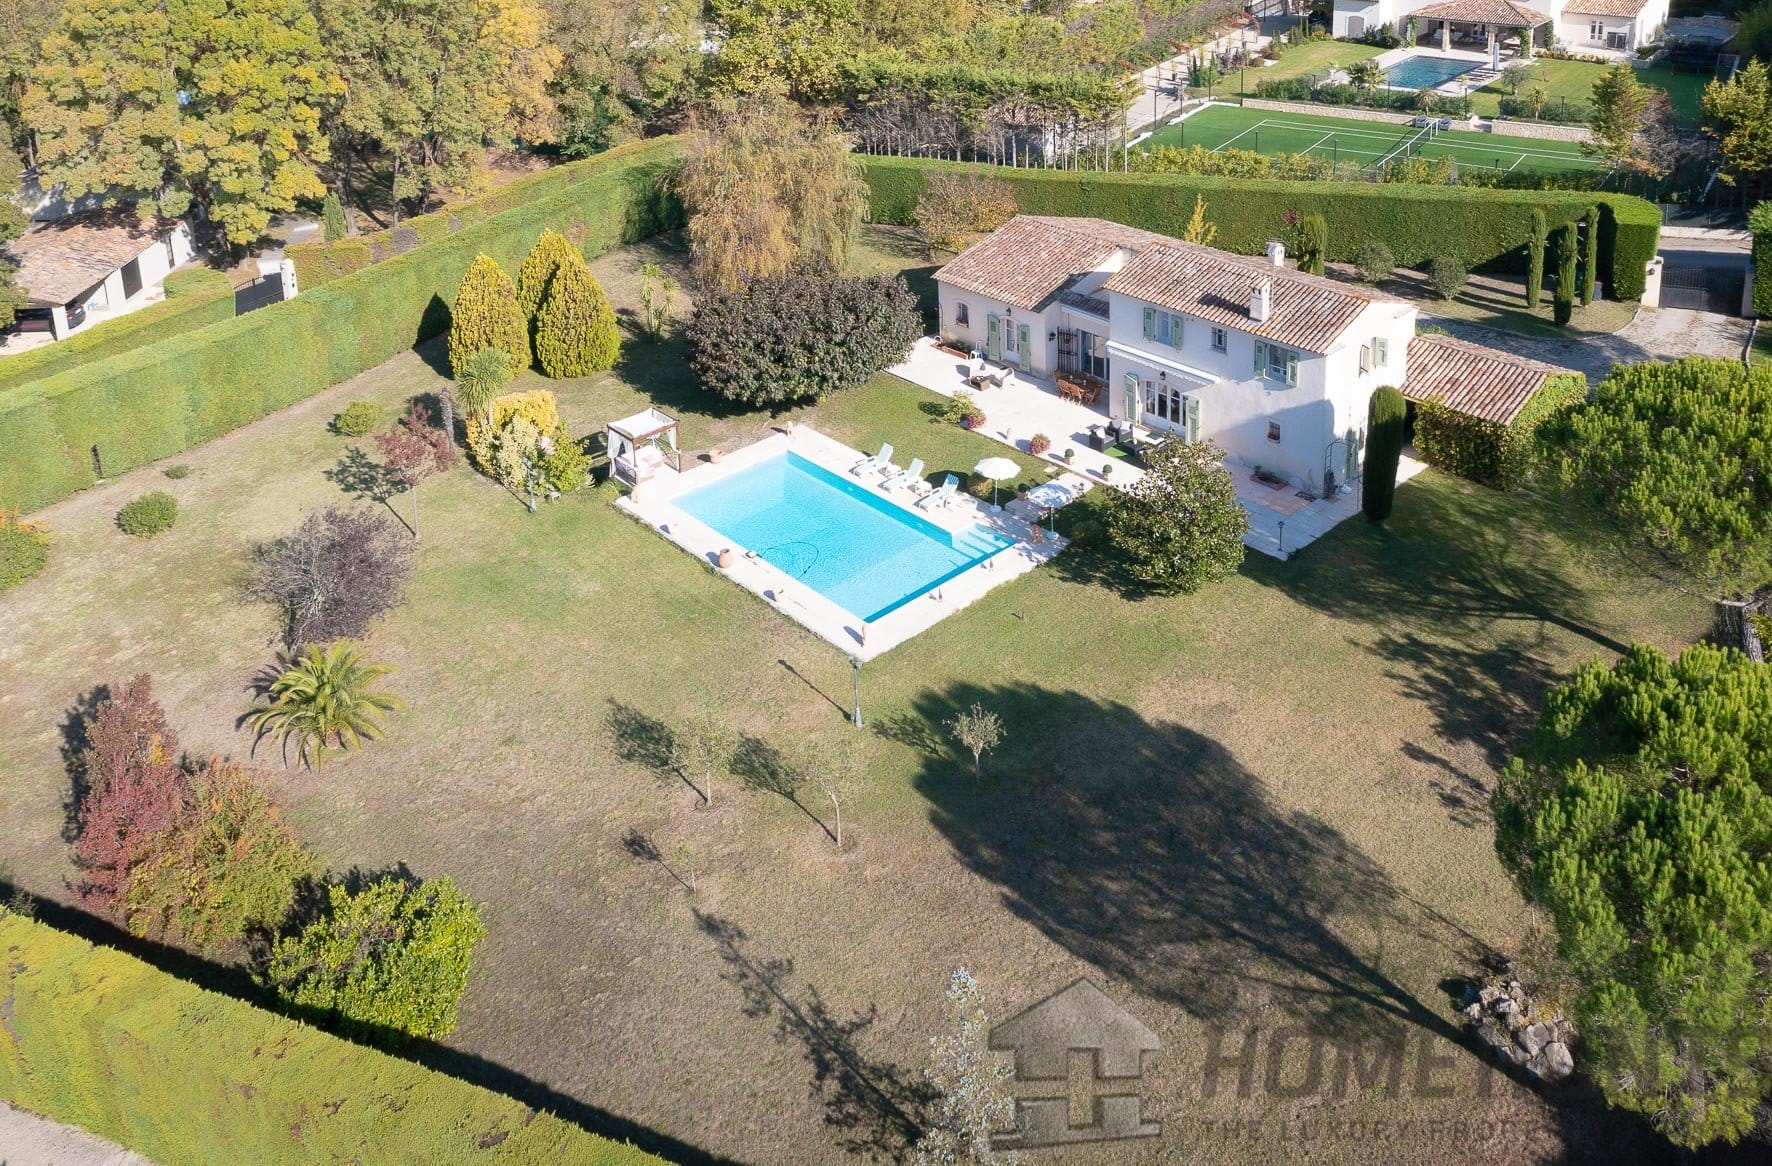 Villa/House For Sale in Chateauneuf Grasse 7